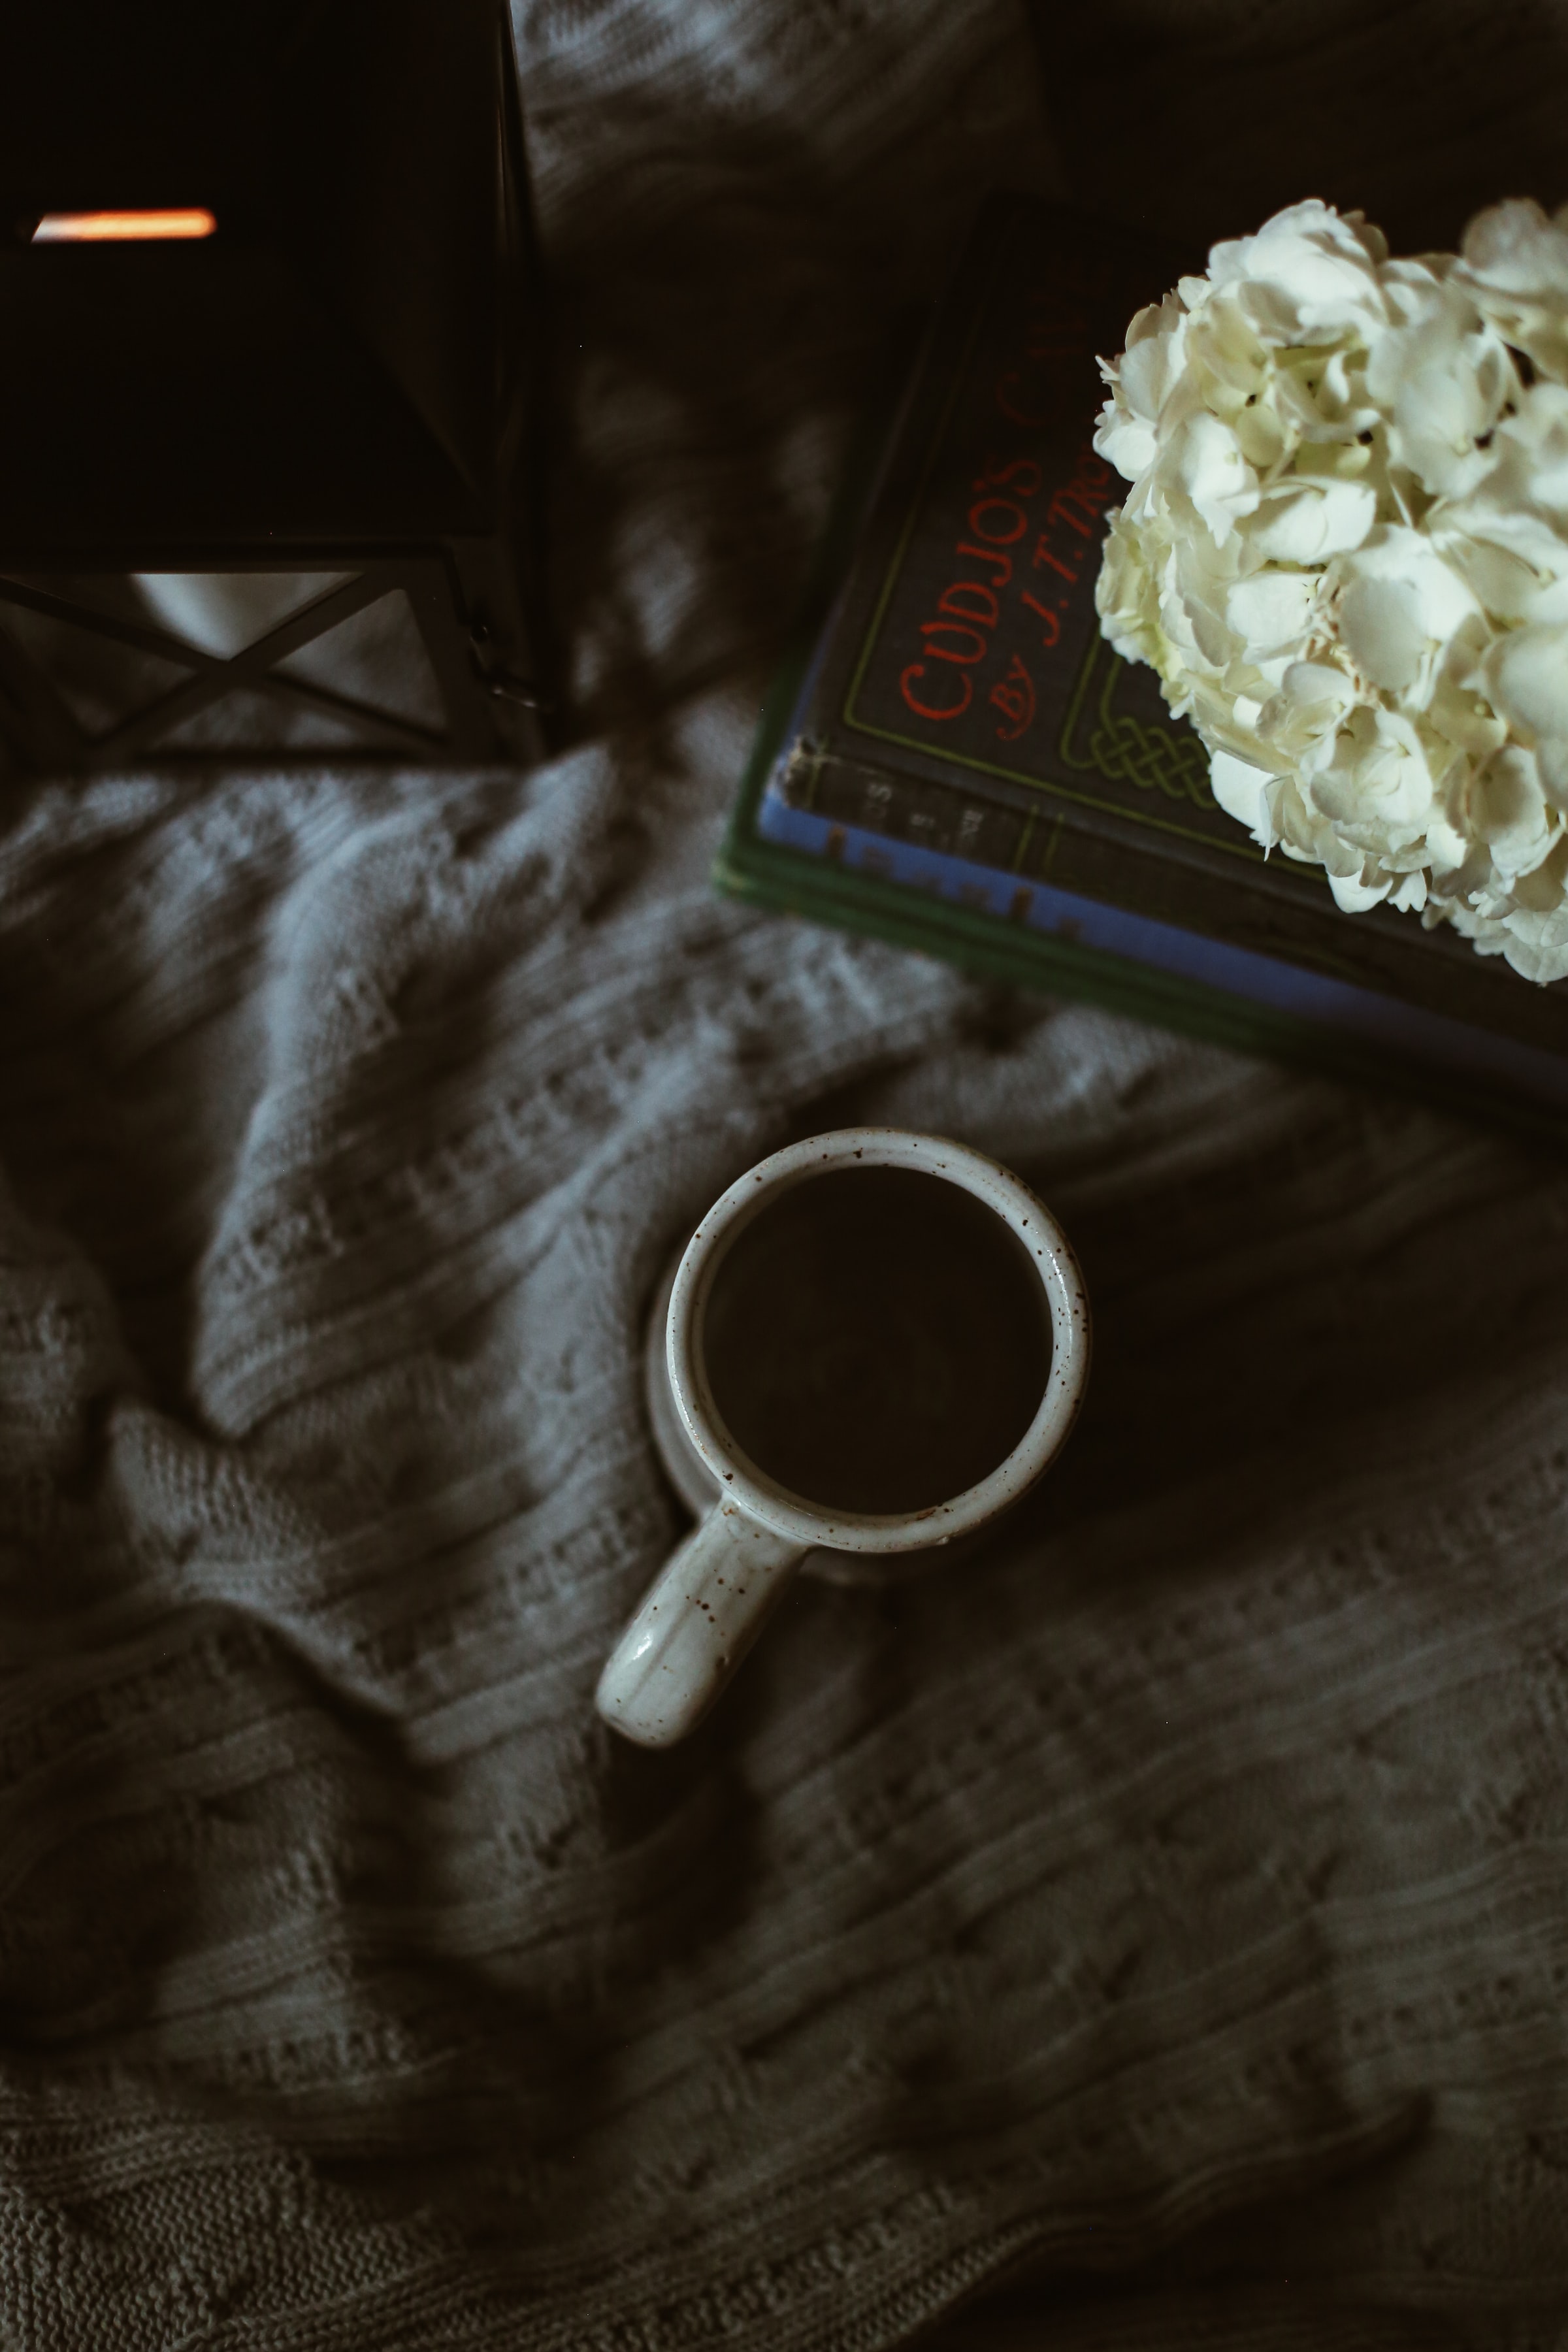 coffee, flowers, miscellanea, miscellaneous, cup, cloth, book